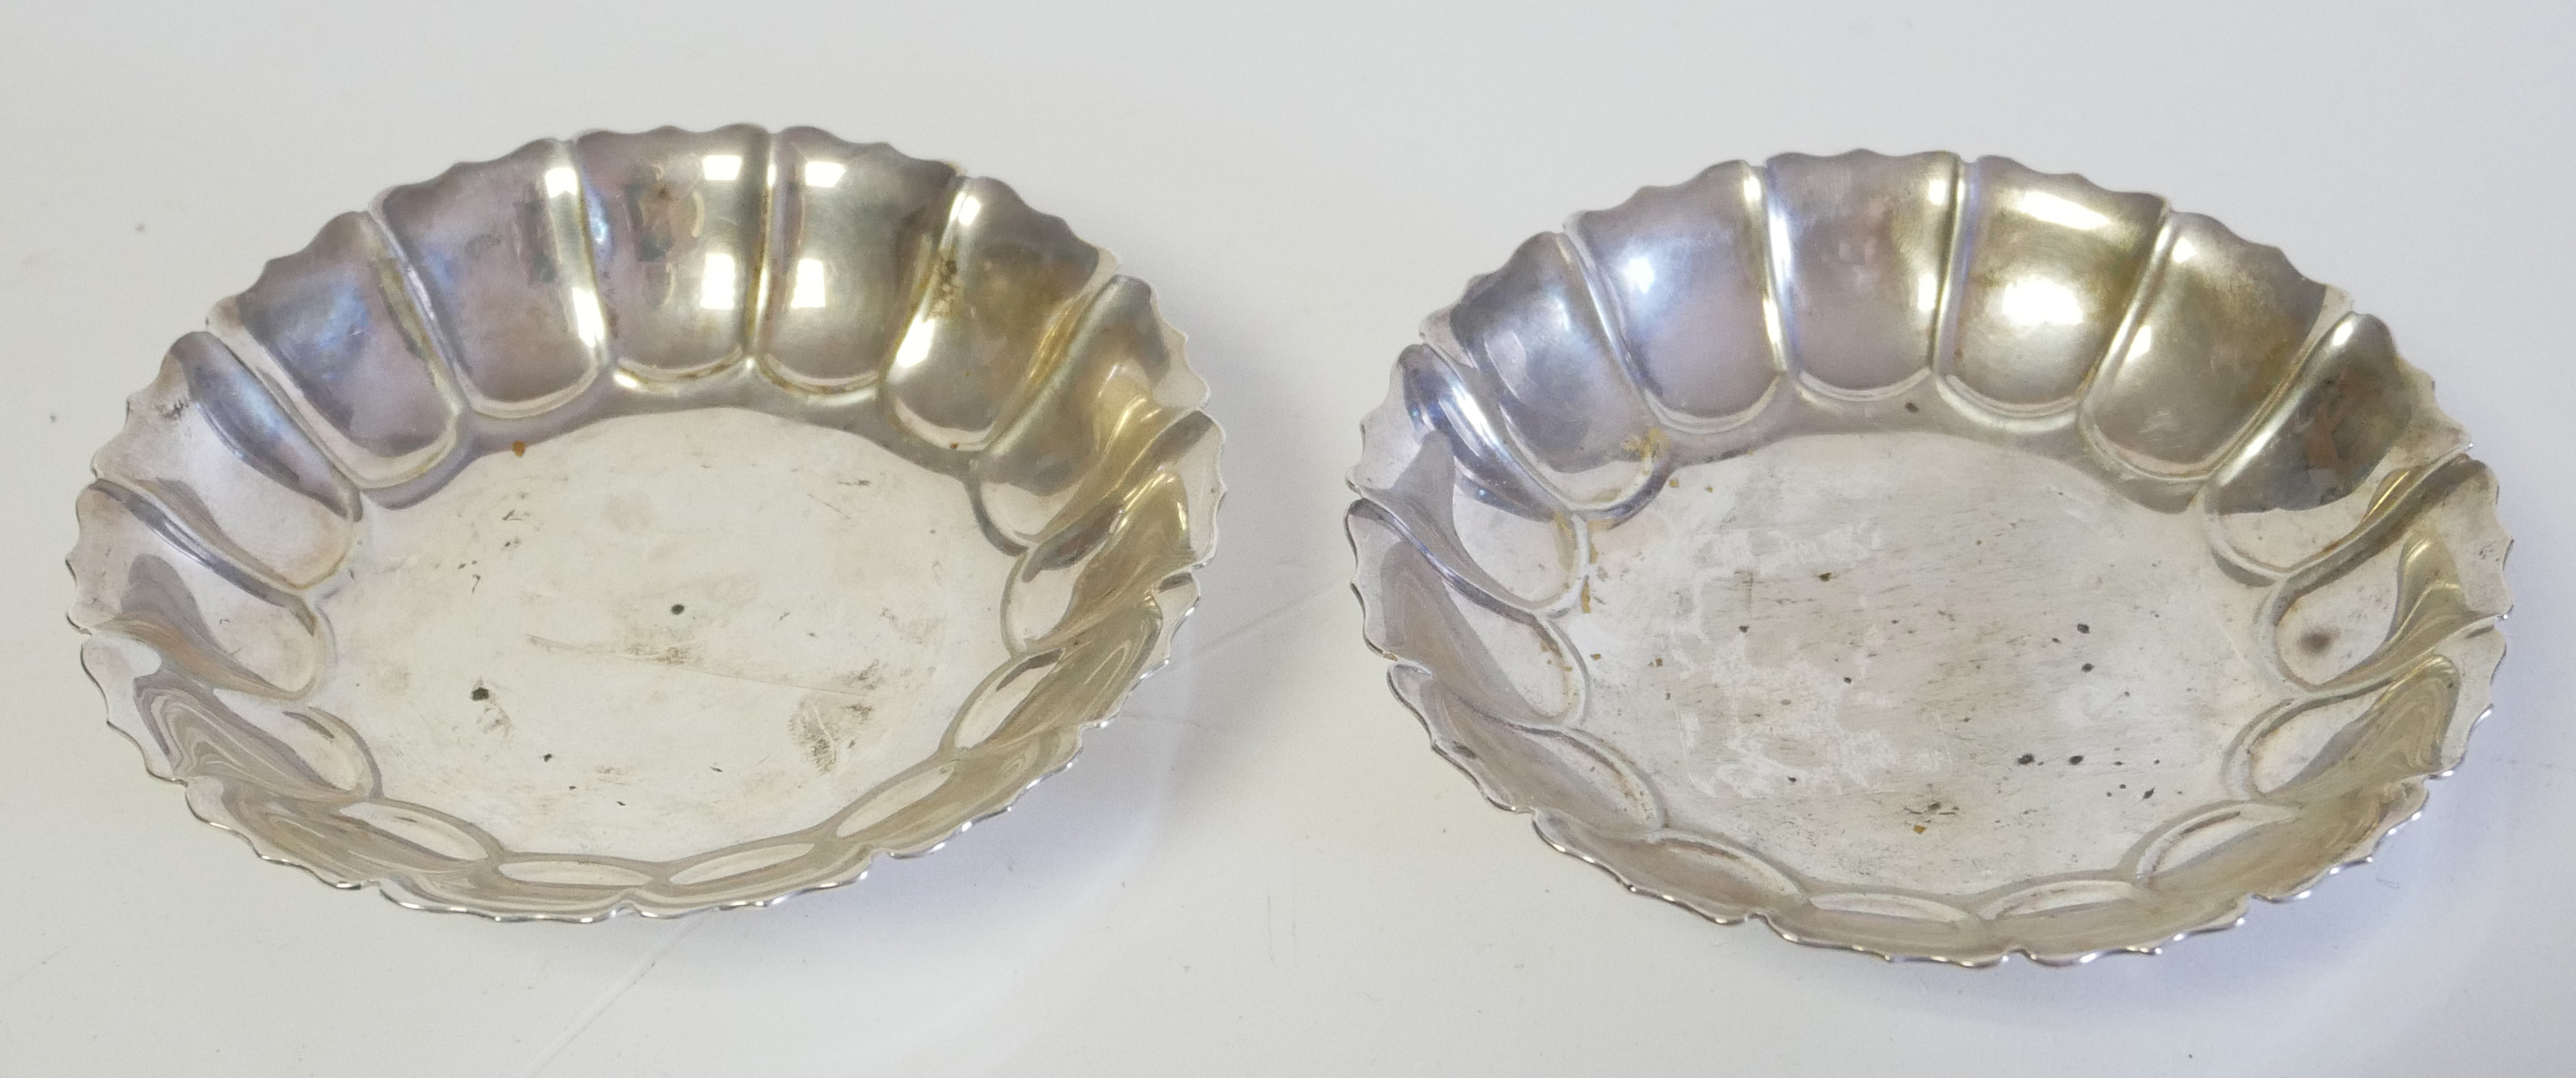 A PAIR OF EARLY 20TH CENTURY SILVER SWEETMEAT DISHES Having a fluted edge, hallmarked Searle and